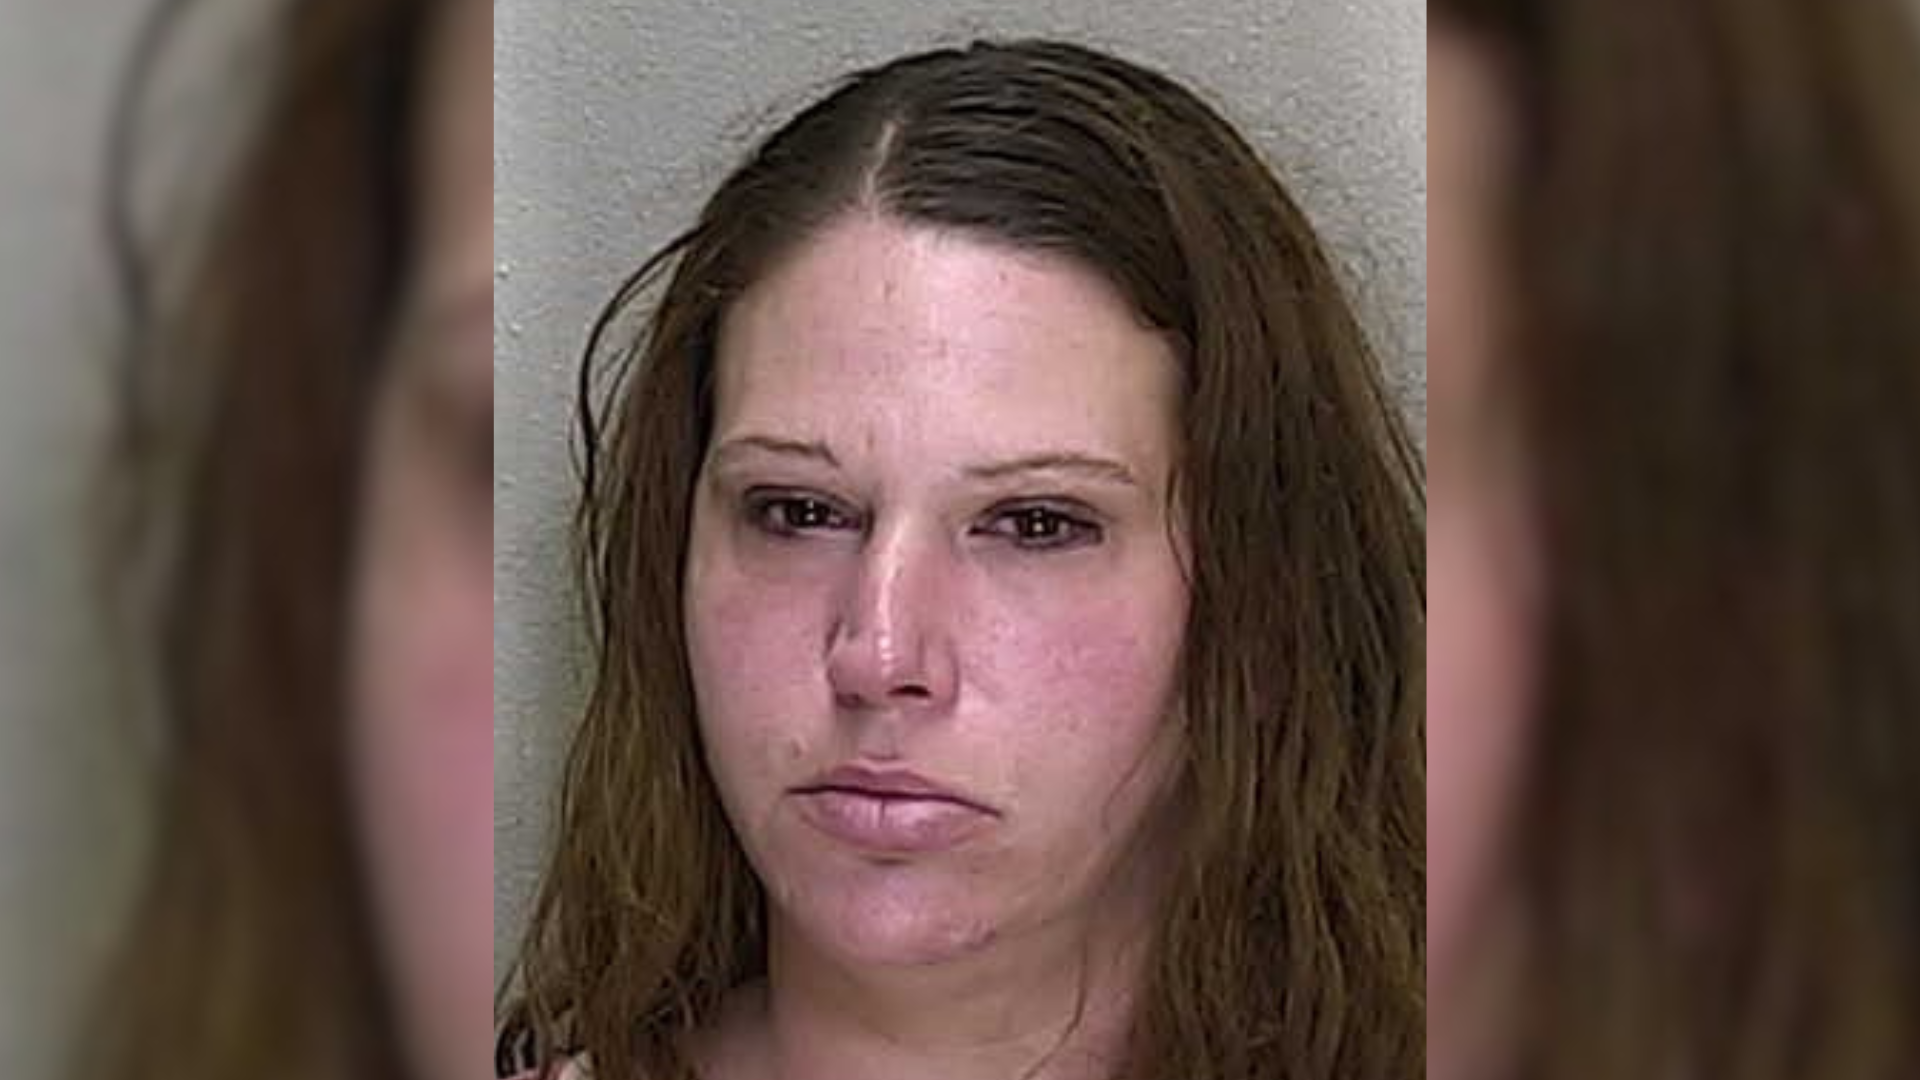 Florida infant died after suffering head trauma, report shows image